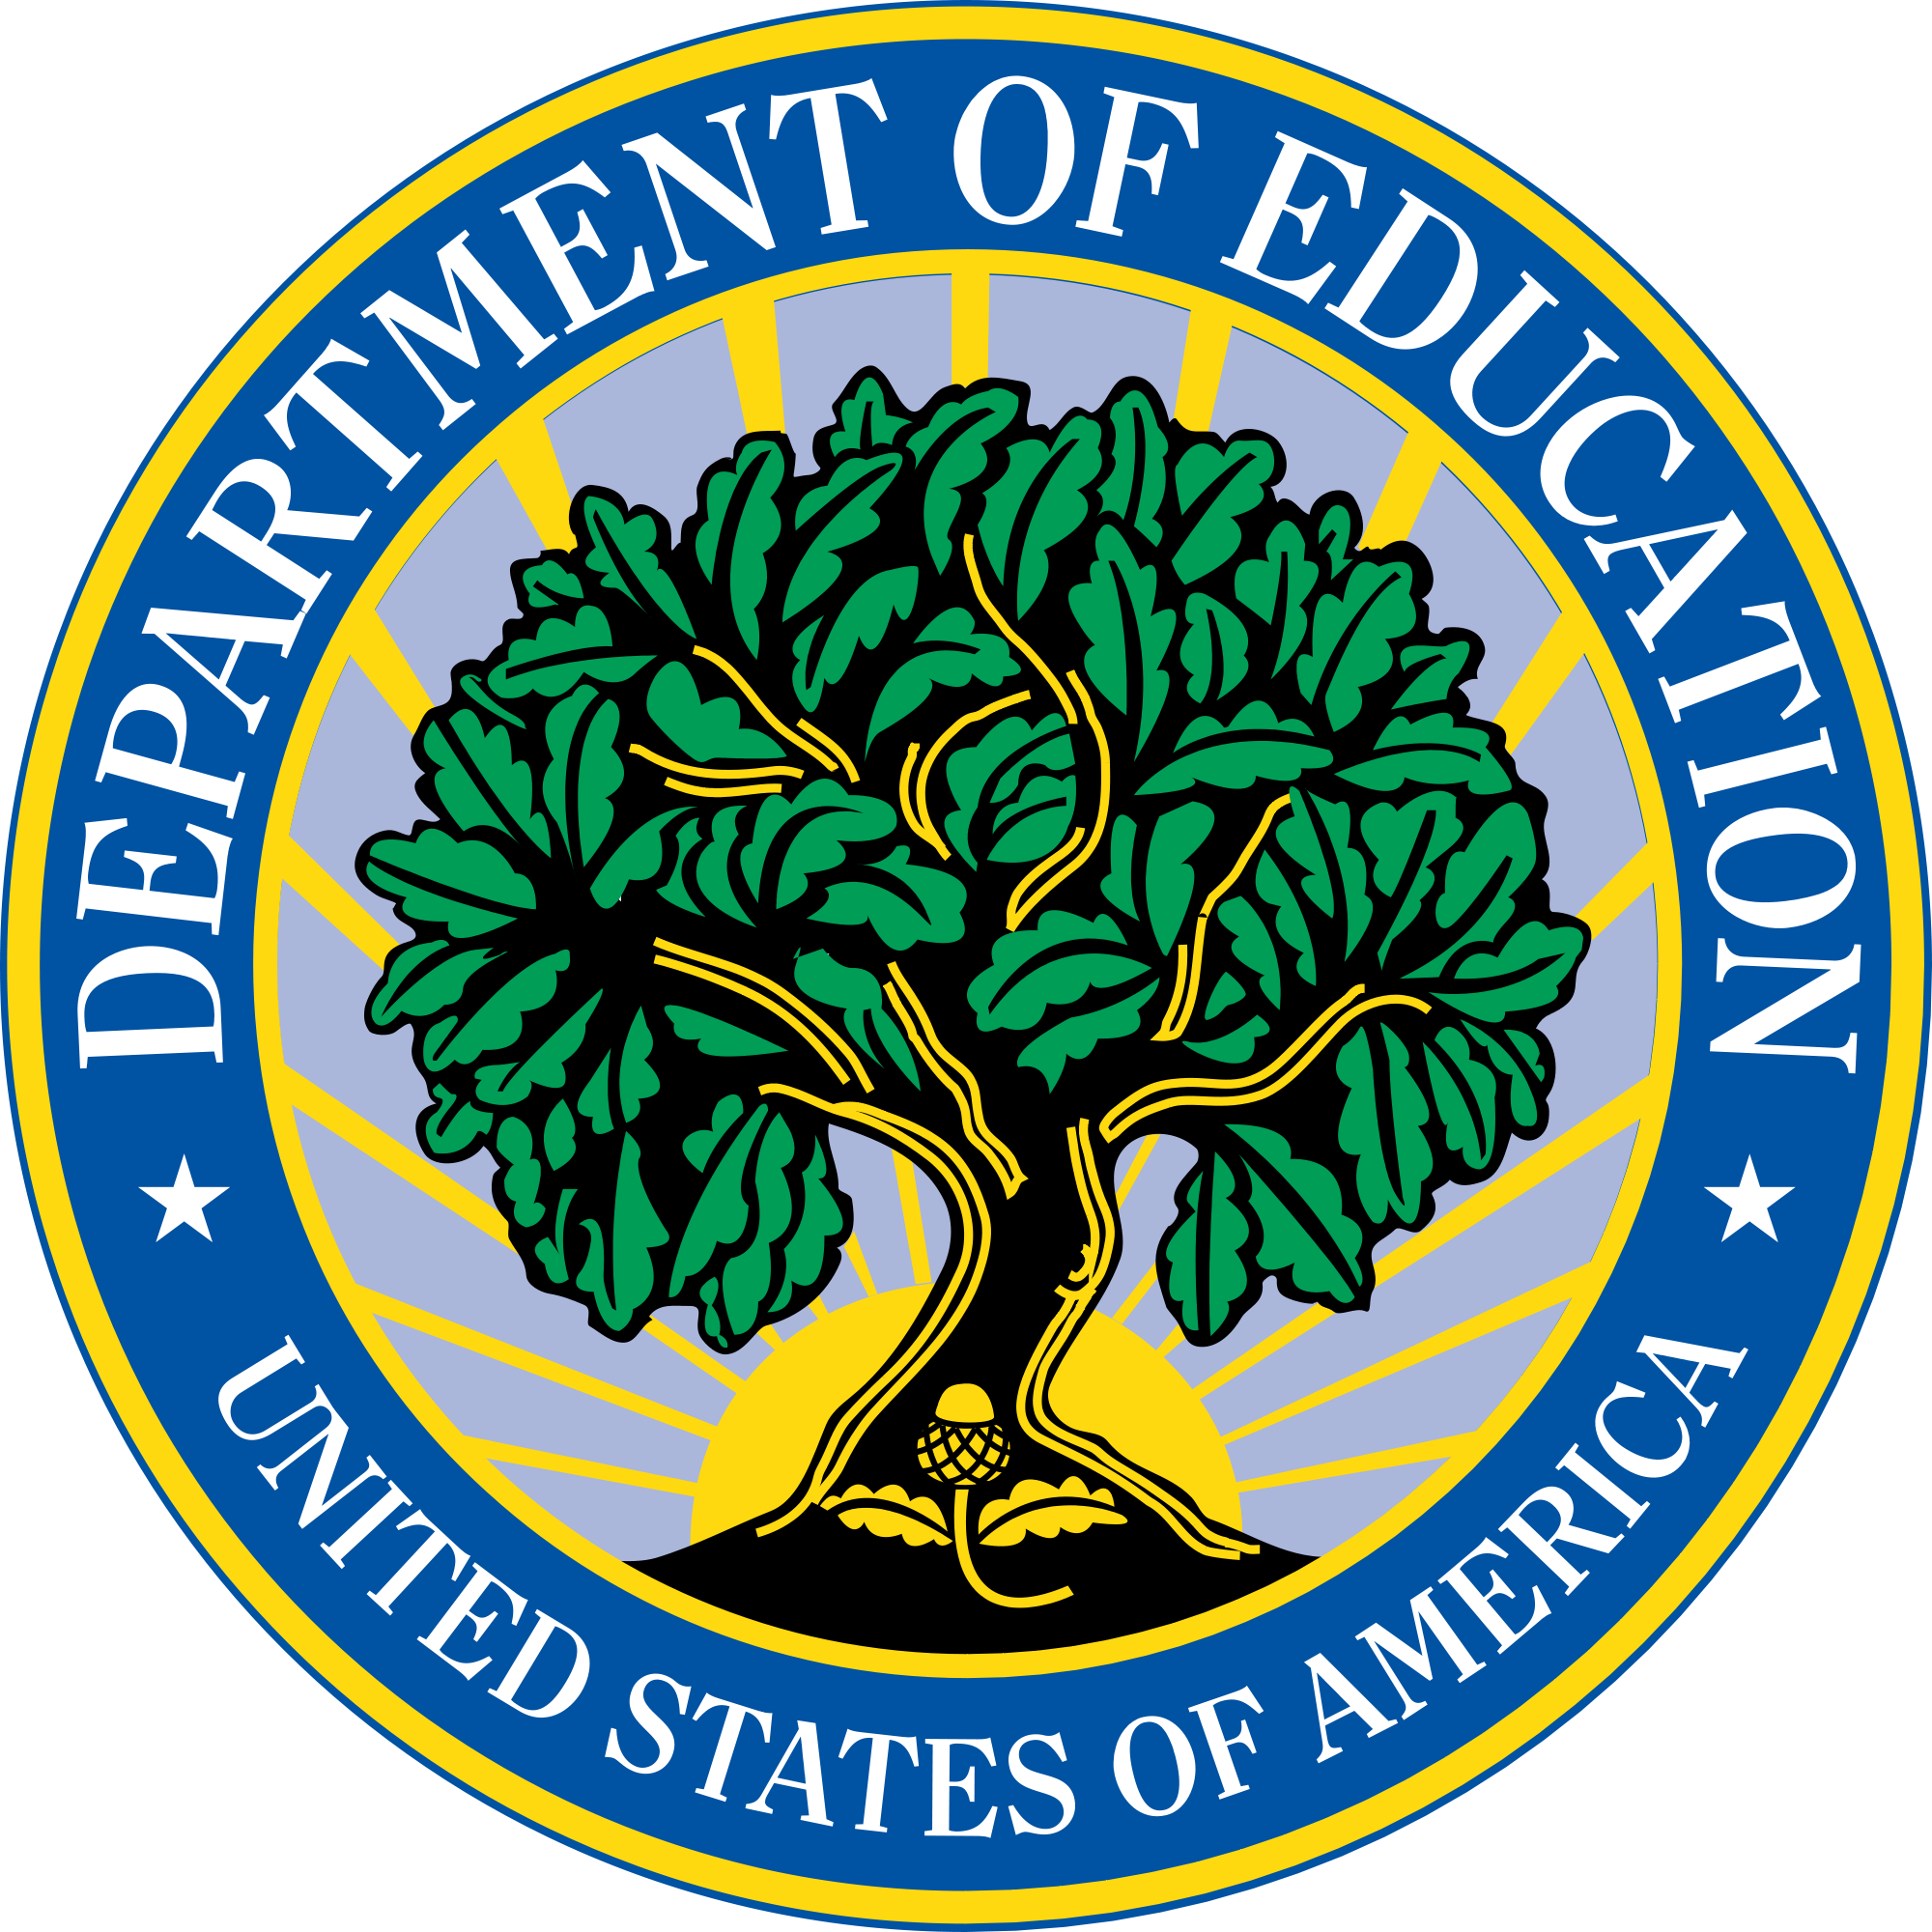 2000px-US-DeptOfEducation-Seal.svg.png